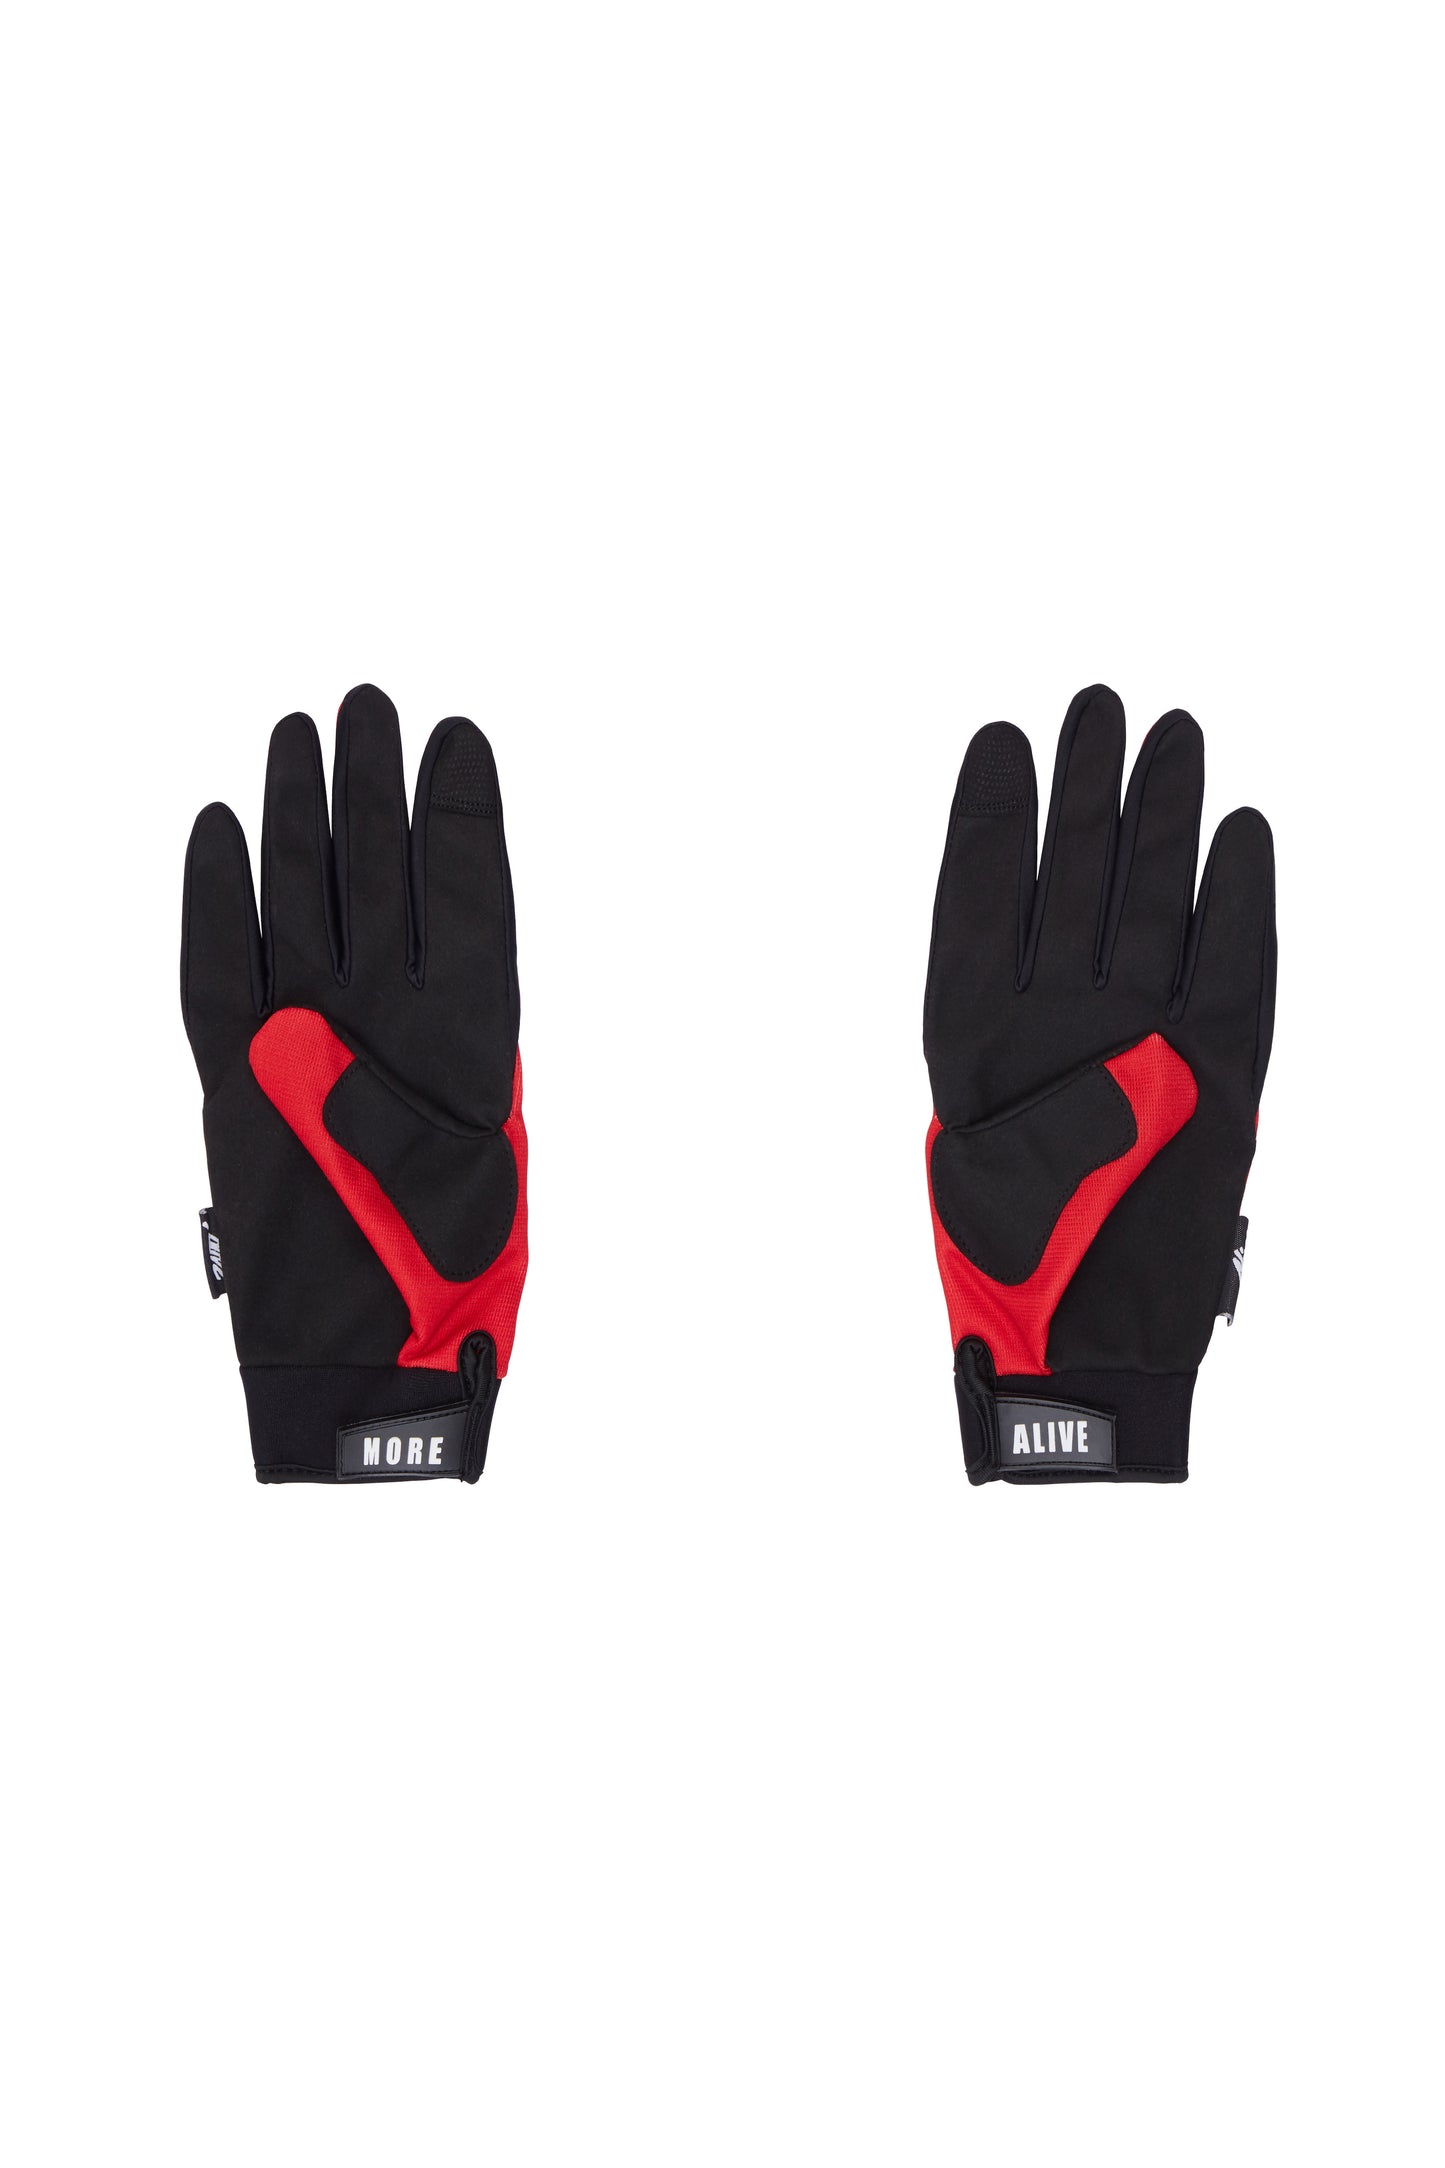 ALIVE & MORE/ MX ACTIVITY GLOVES TRUE RED